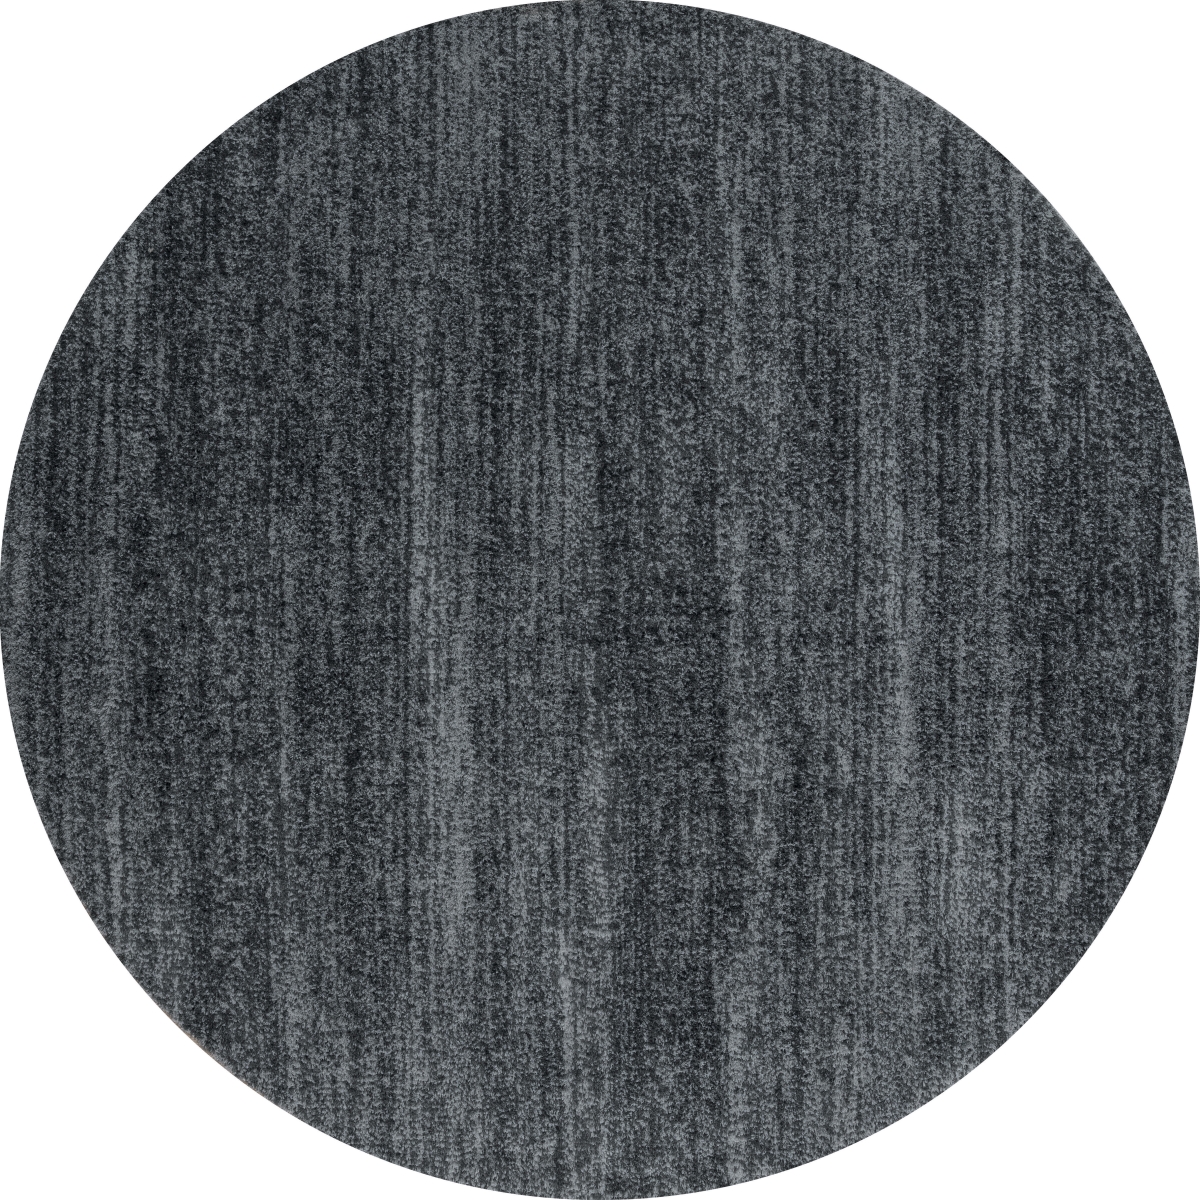 1840 20877 88r 7 Ft. 10 In. X 7 Ft. 10 In. Tranquility Zuelia Smoke Round Rug